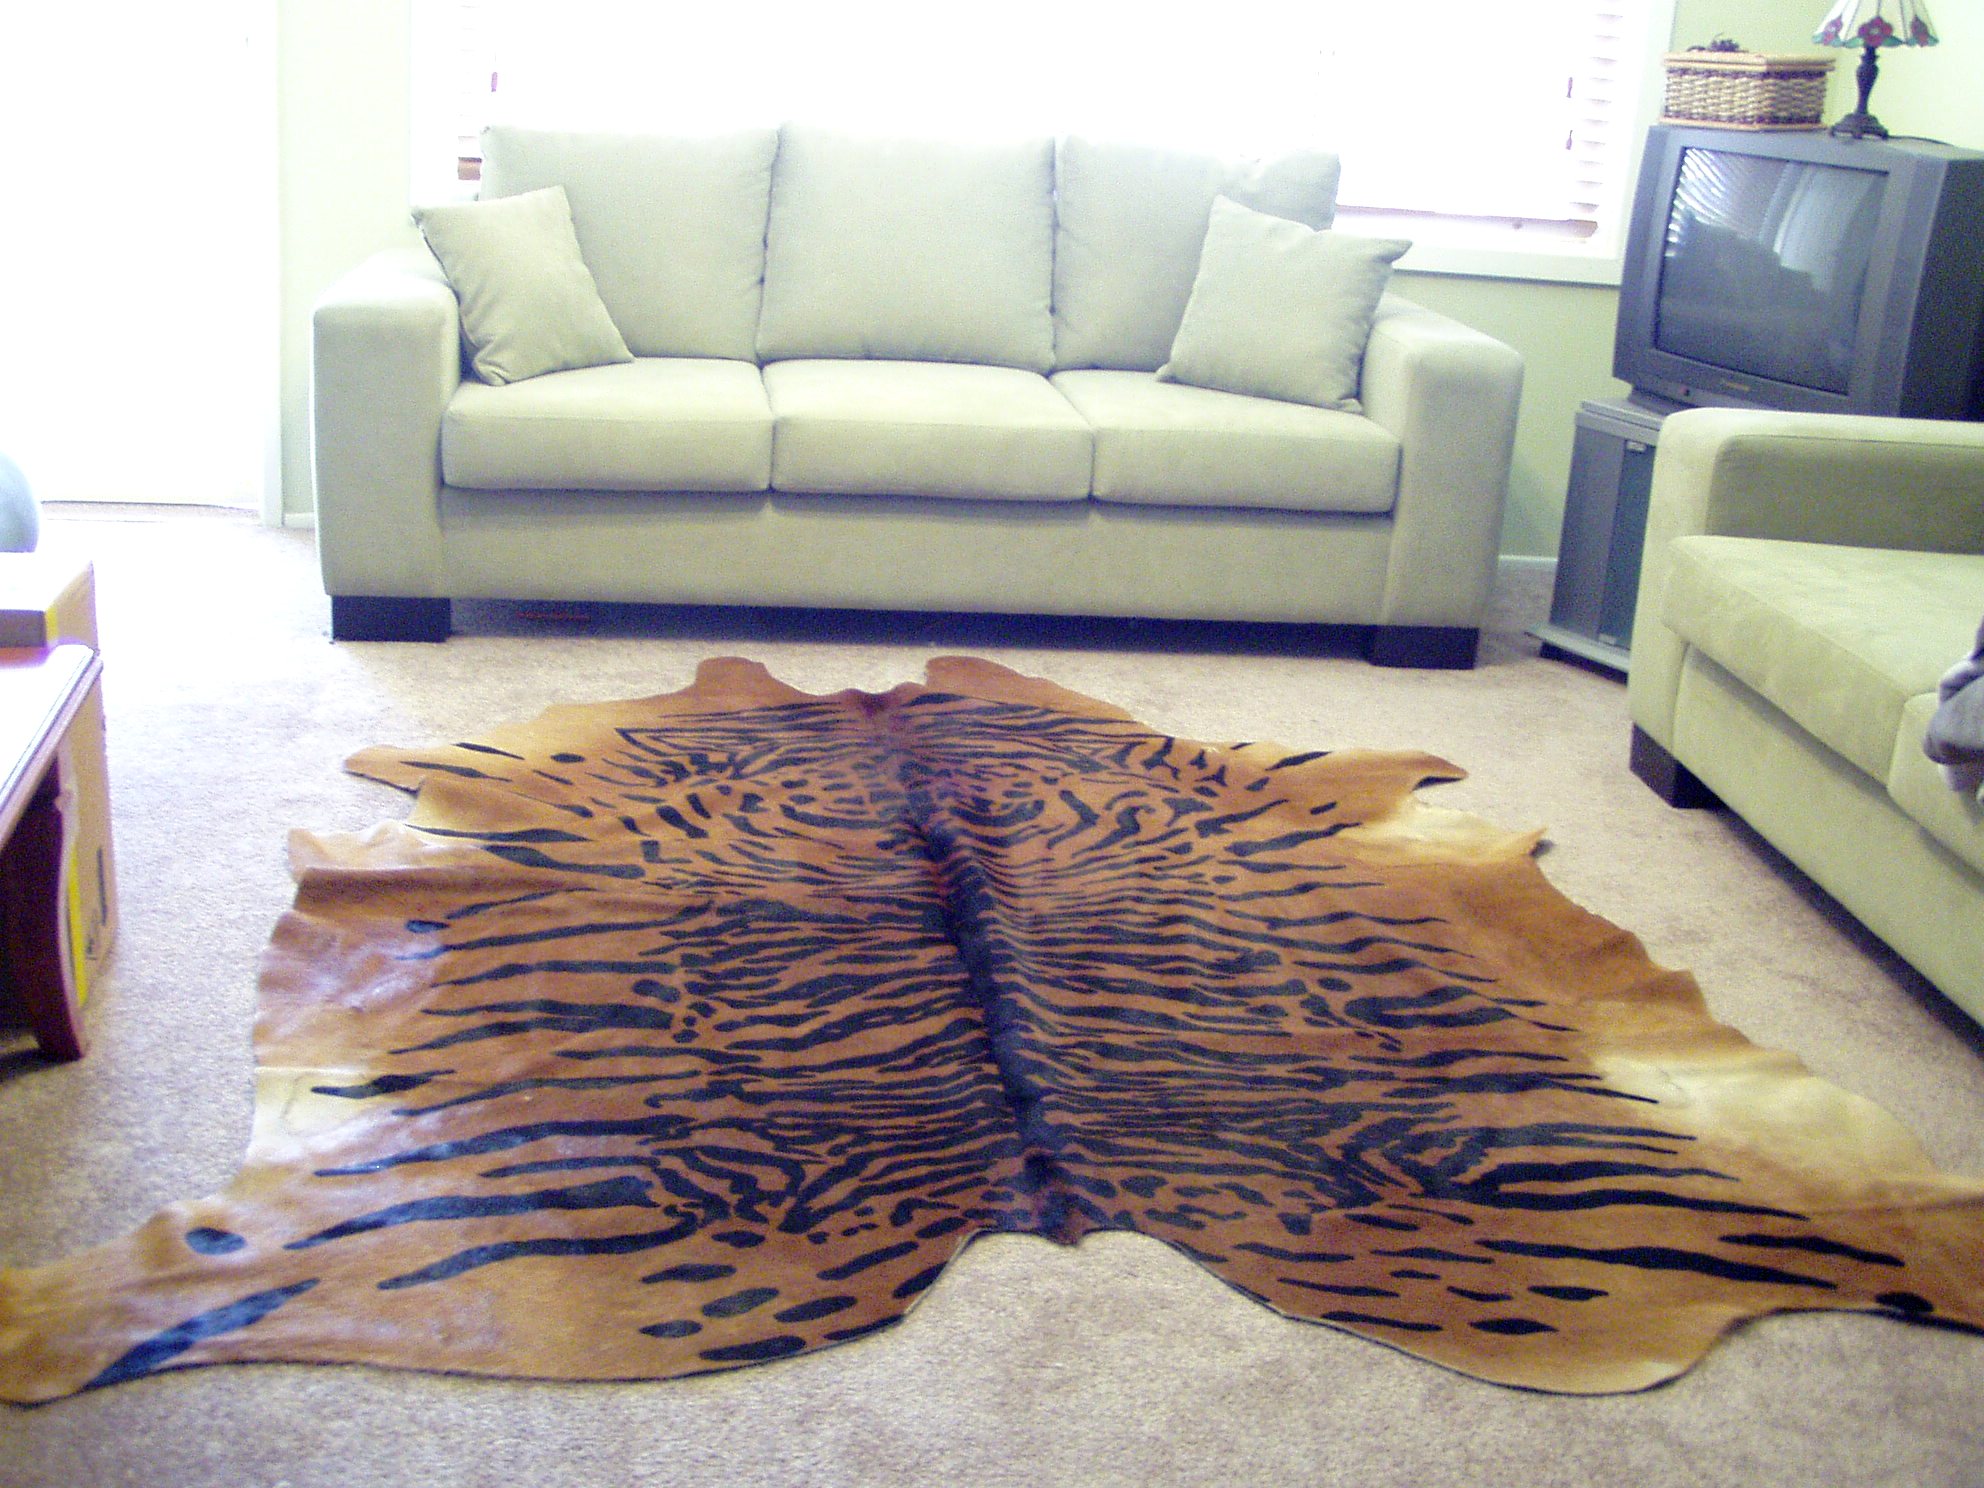 THE LUXURIOUS BENGAL TIGER HAIR ON COWHIDE RUG : $400 - Click Image to Close